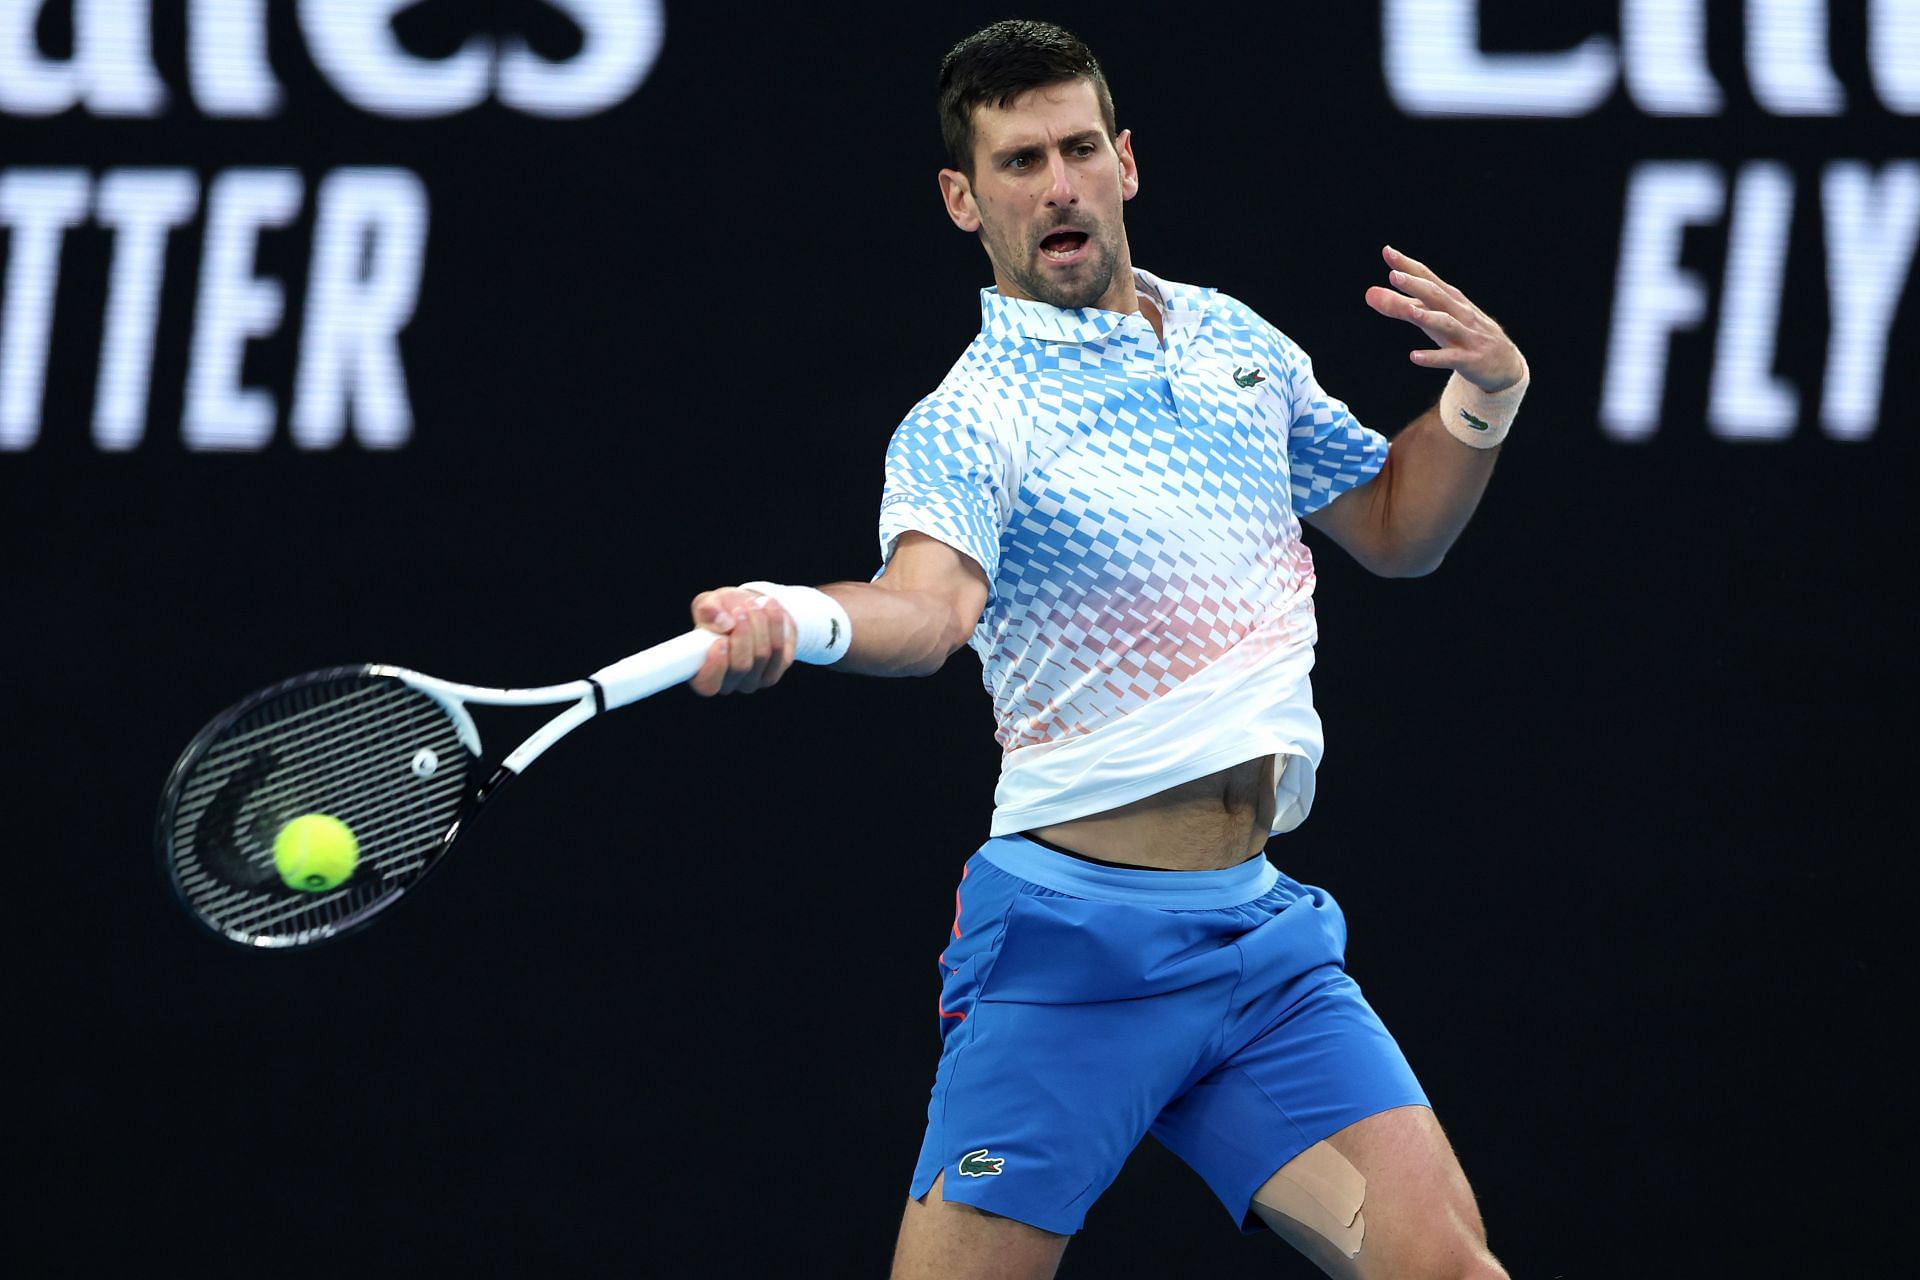 Tim Henman [not in picture] reckons the Serb is more drawn to the Grand Slam race than the No. 1 ranking